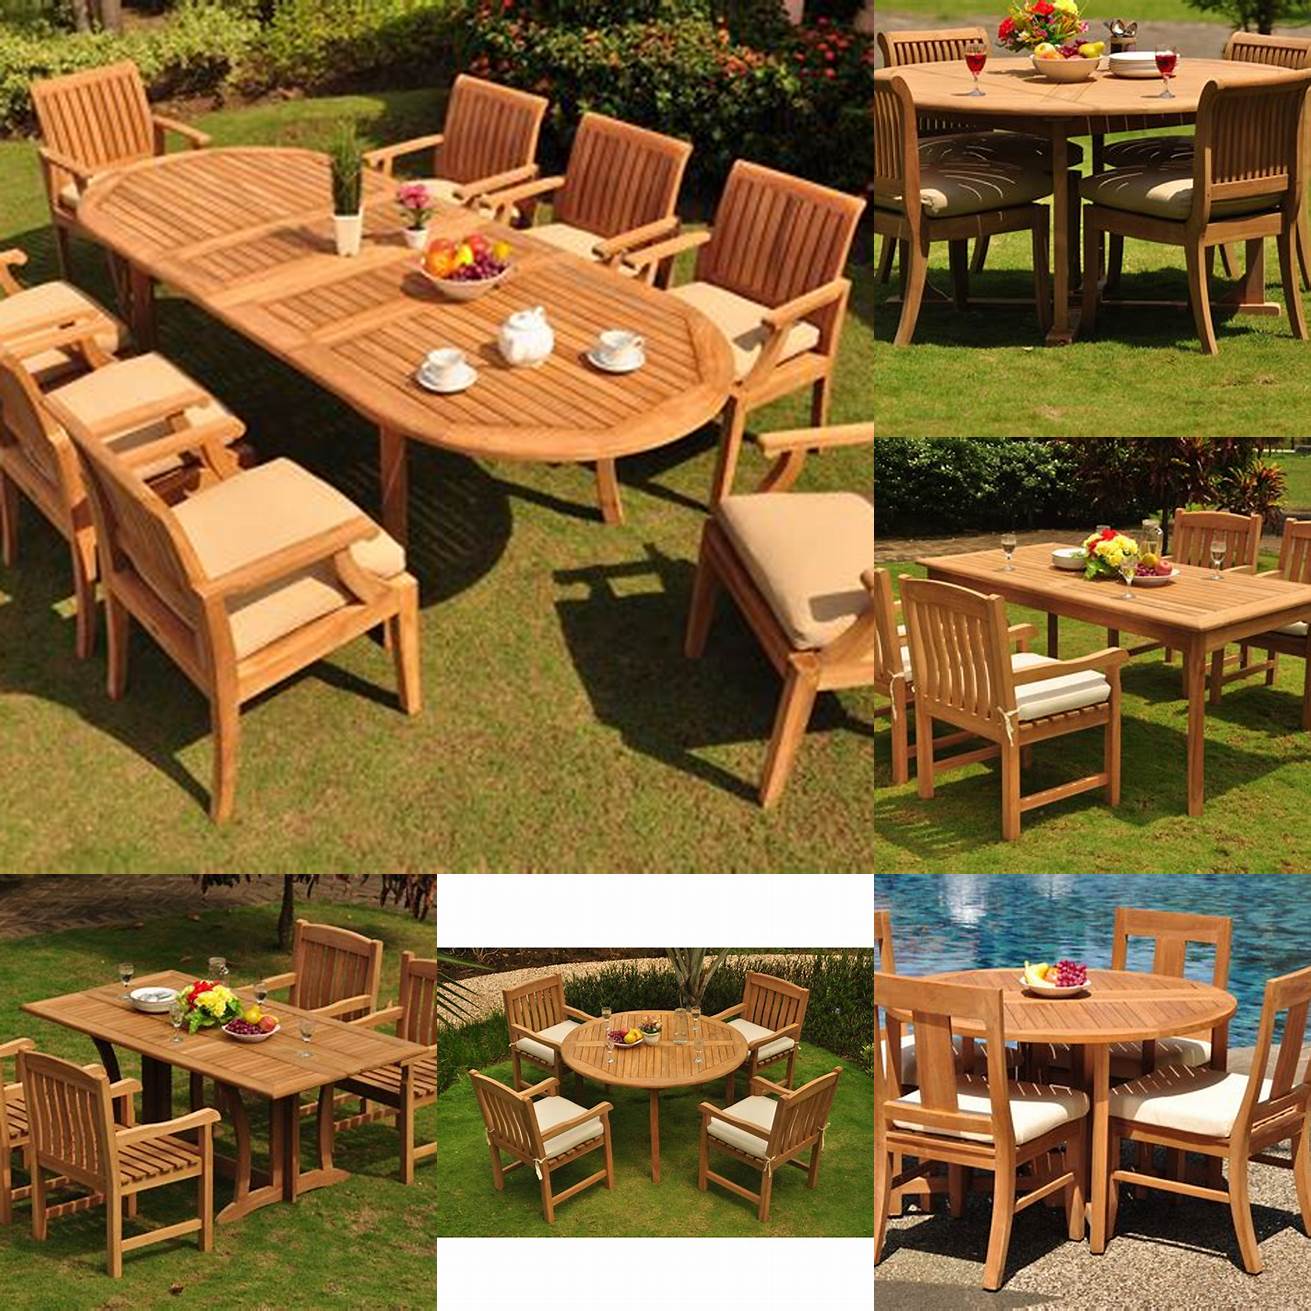 Teak dining table and chairs set